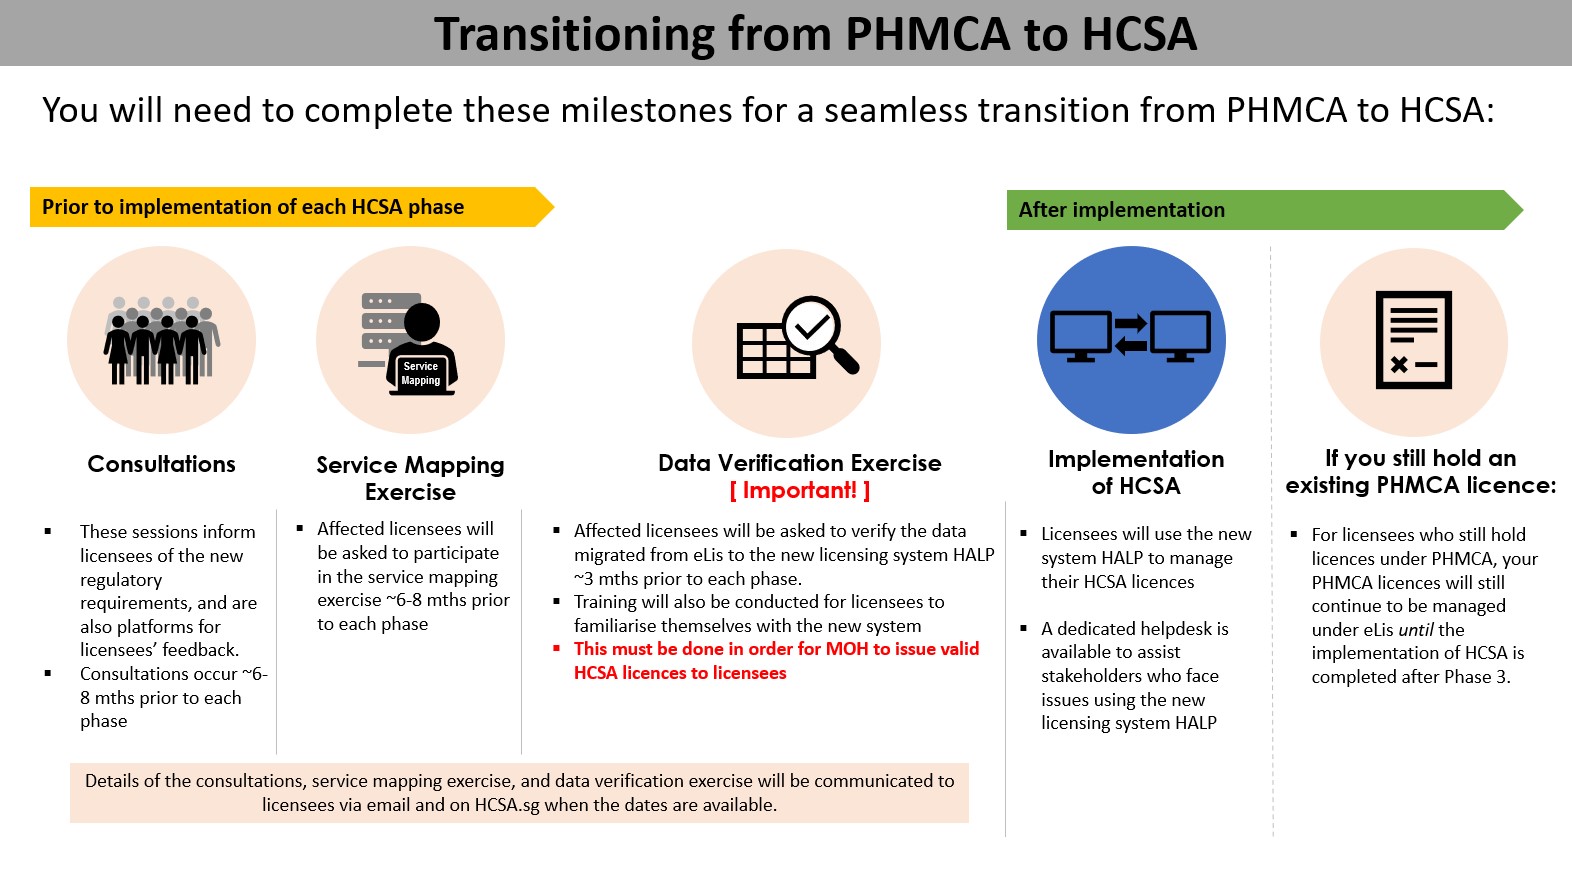 Transition from PHMCA to HCSA